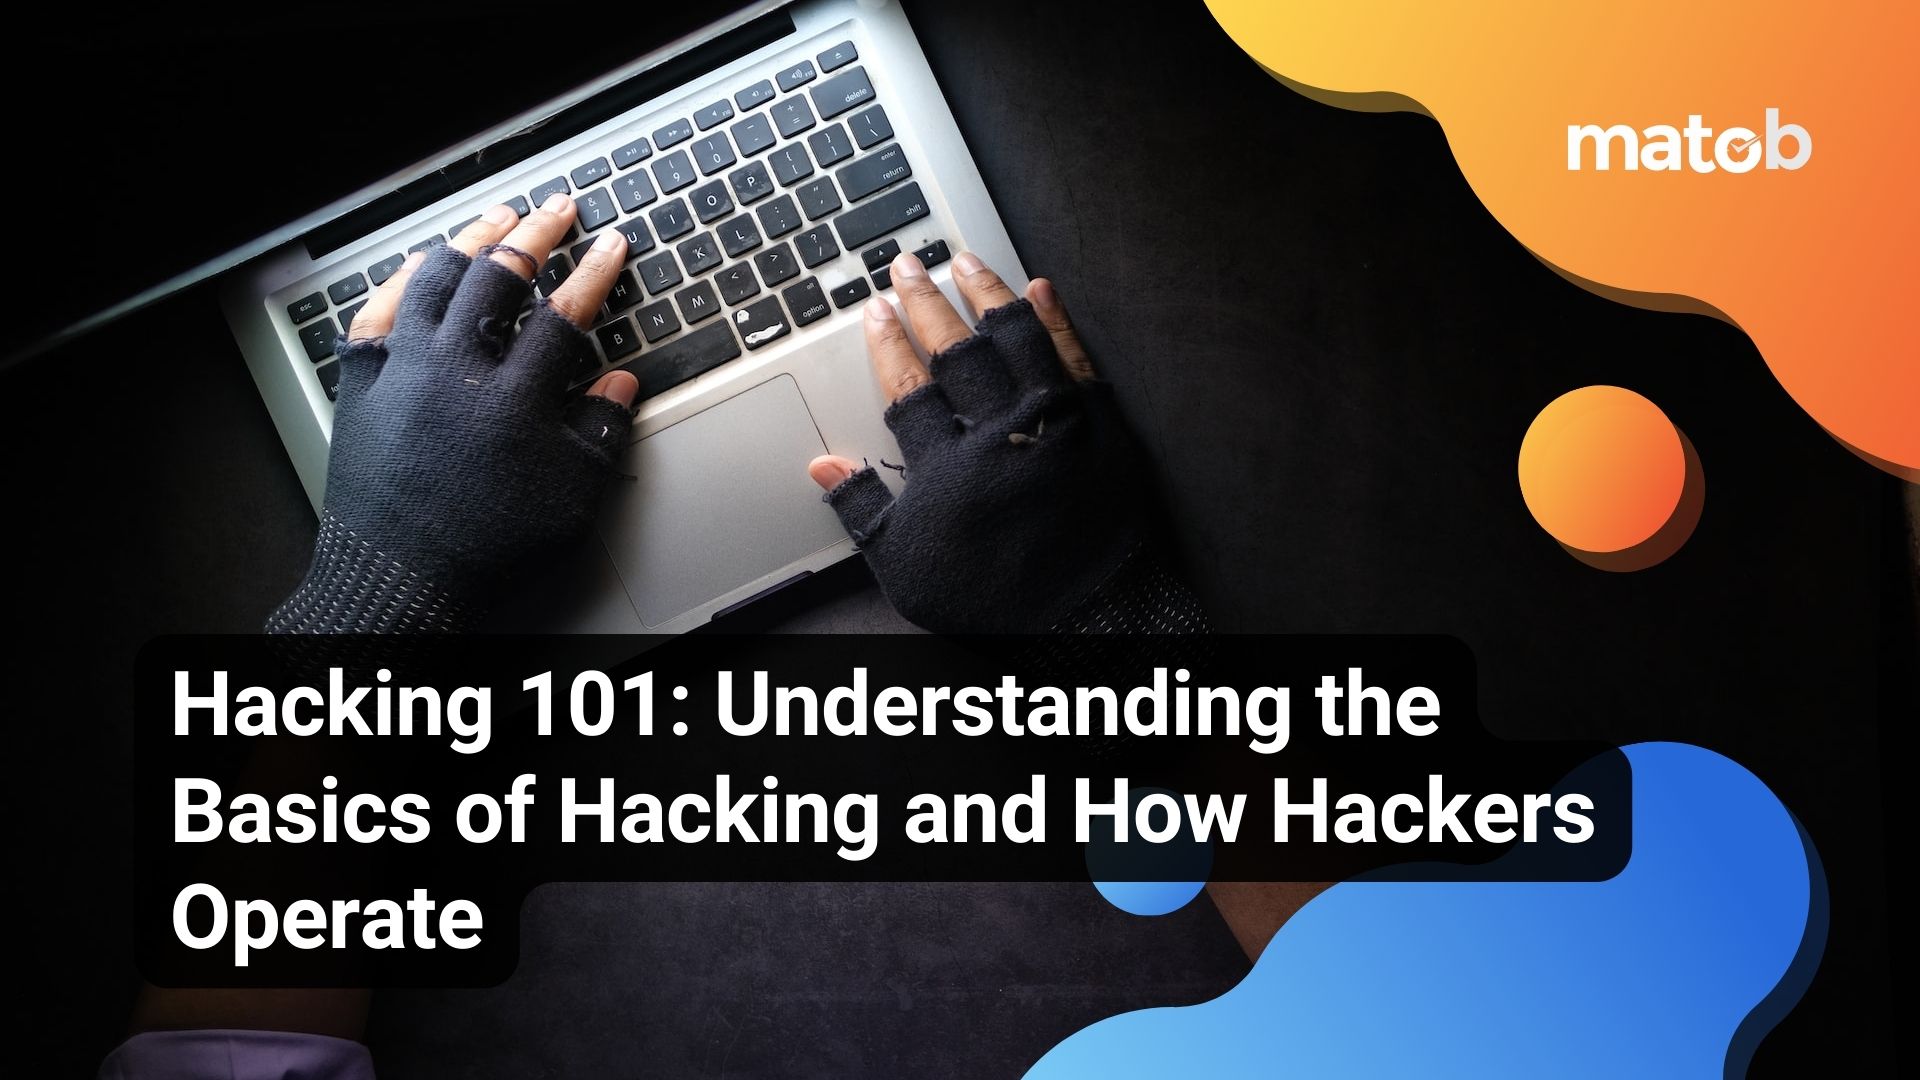 Hacking 101: Understanding the Basics of Hacking and How Hackers Operate